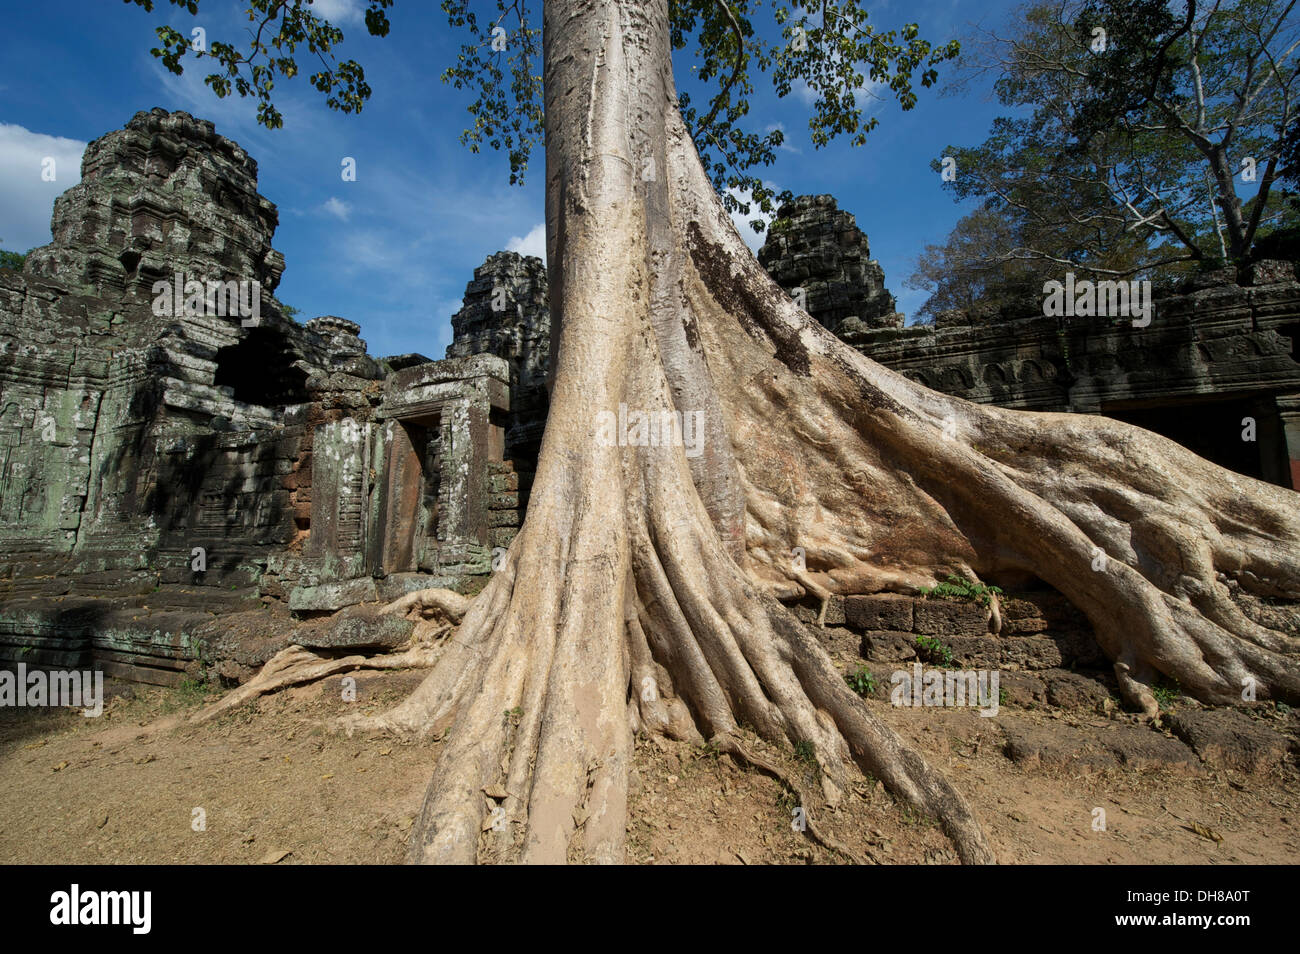 Trees overgrowing the temple complex of Banteay Kdei, Banteay Kdei, Siem Reap, Siem Reap Province, Cambodia Stock Photo